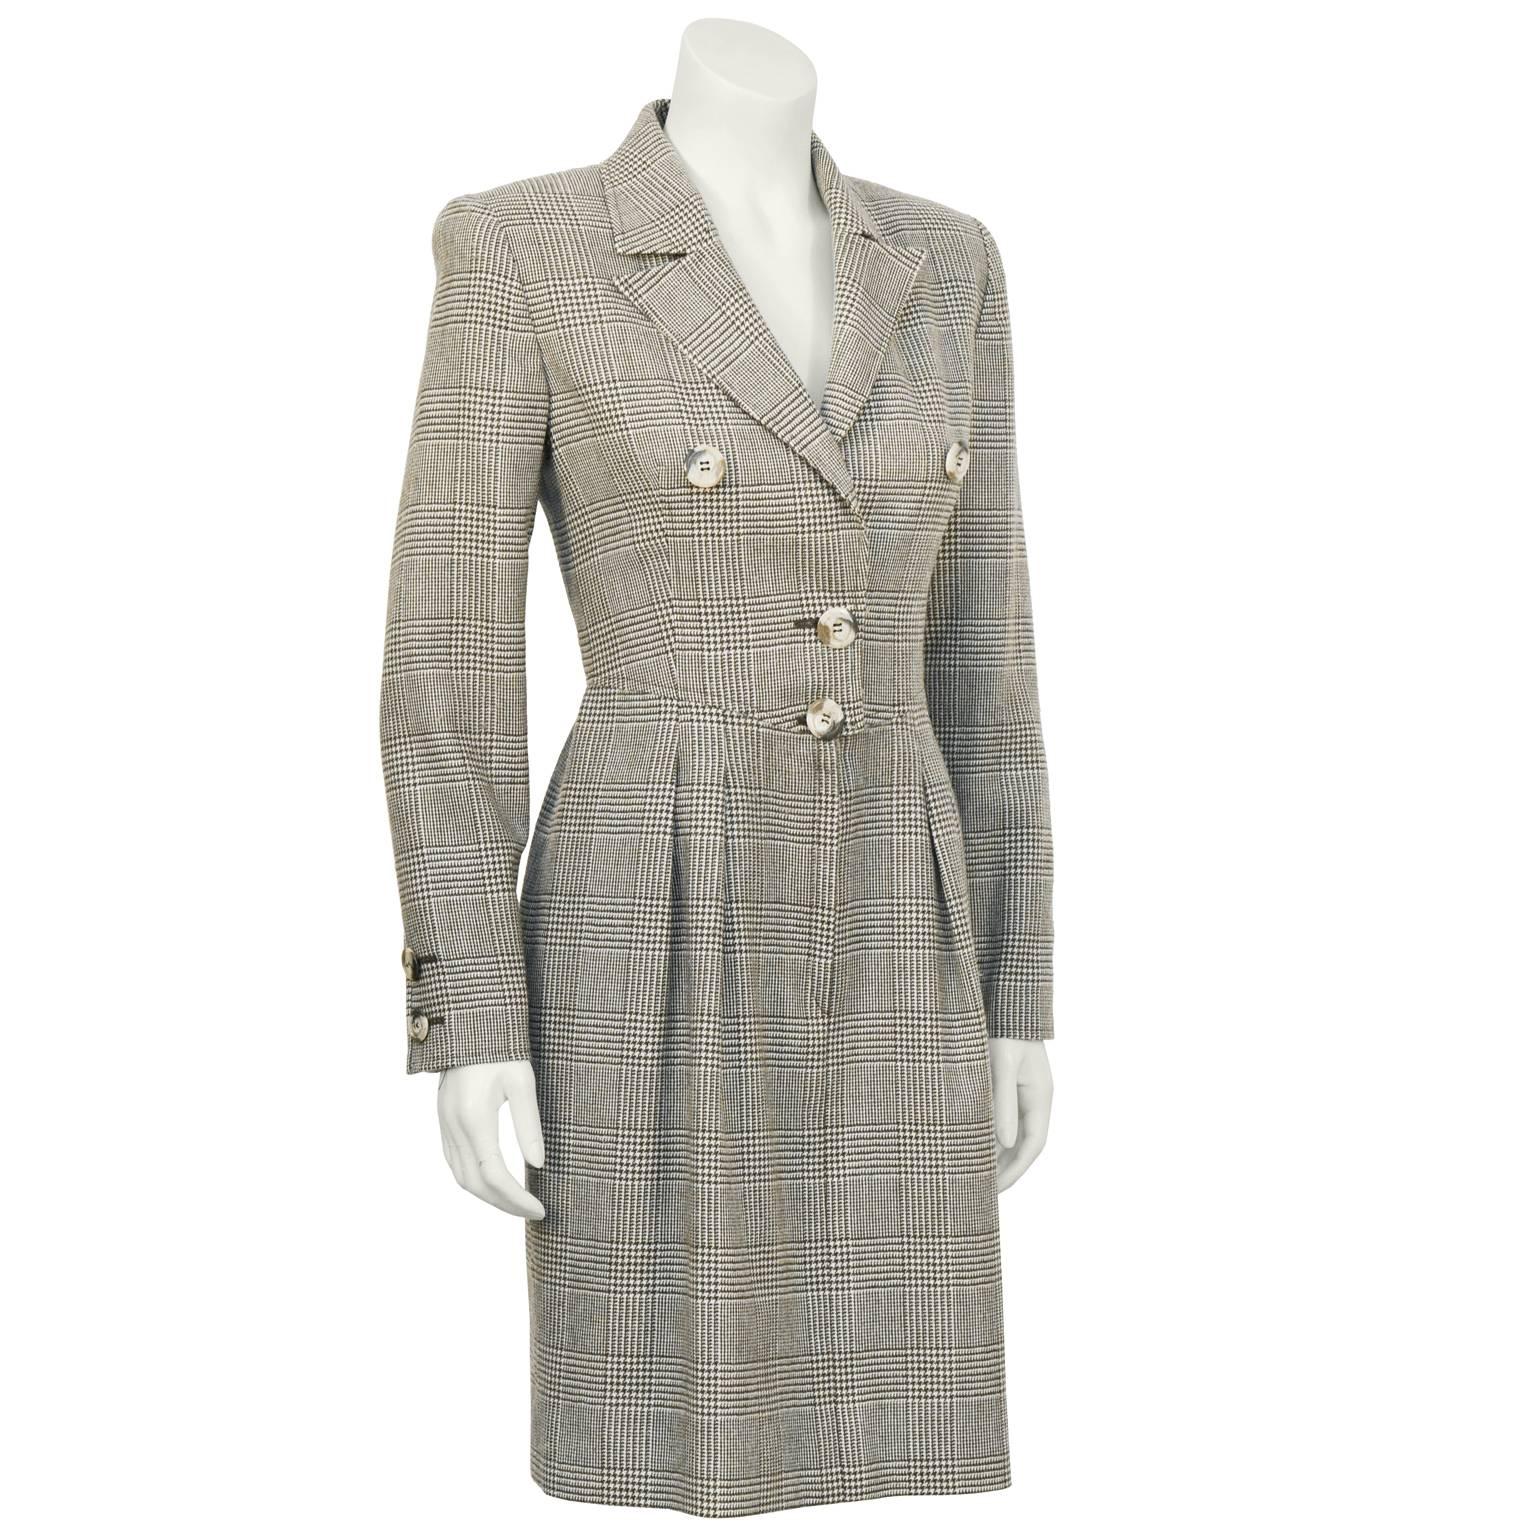 Valentino brown Glen check wool dress from the 1980's. Notched collar, fastens with hidden hooks and short fly zipper with two large buttons on the front. Matching faux tortoise buttons on the cuffs. Slight gather at the waist with inseam pockets on